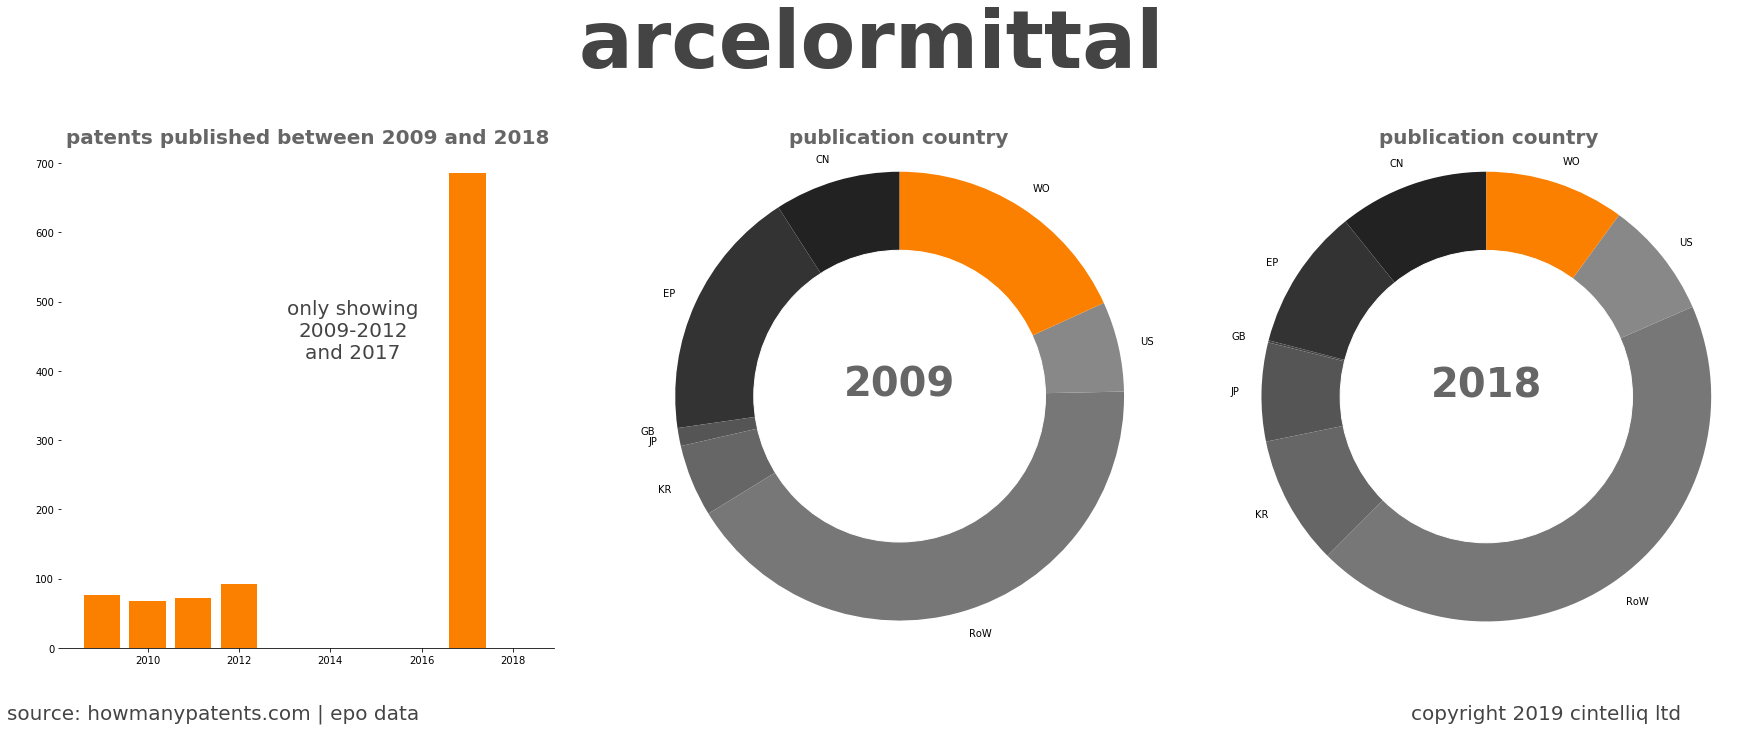 summary of patents for Arcelormittal